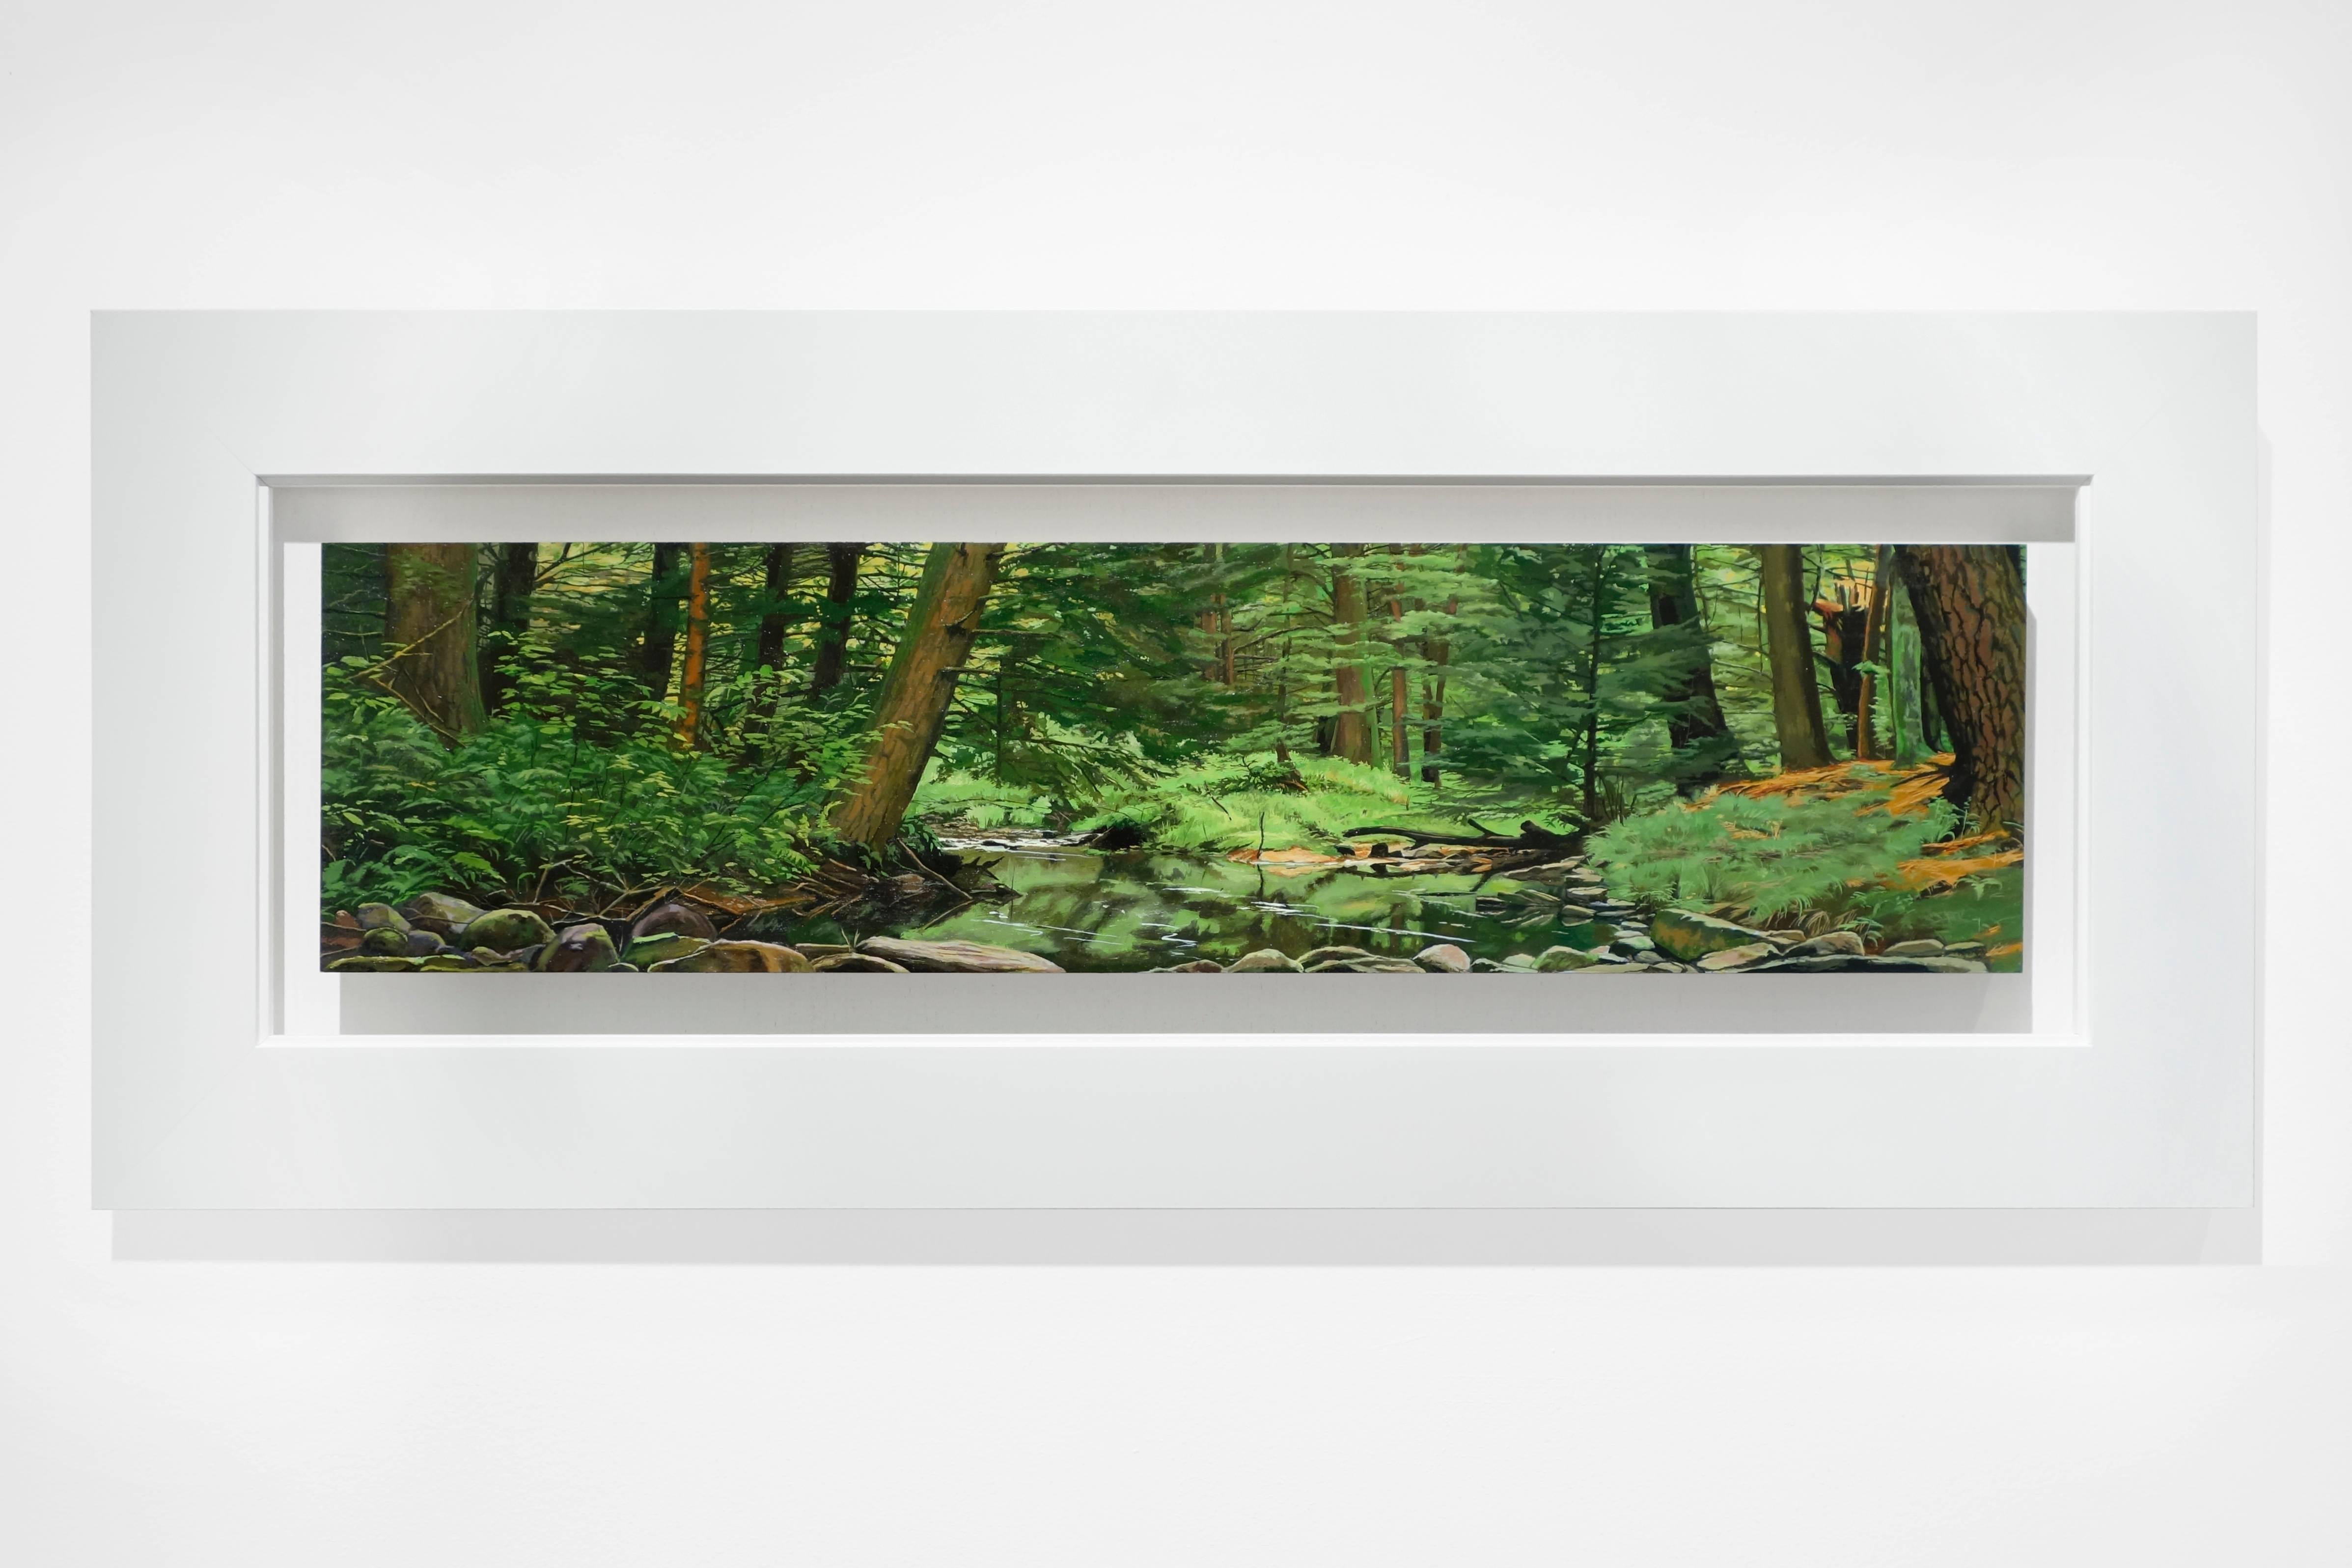 WISSAHICKON, photo-realism, woods, green, nature, landscape, panorama - Painting by Steve Cope